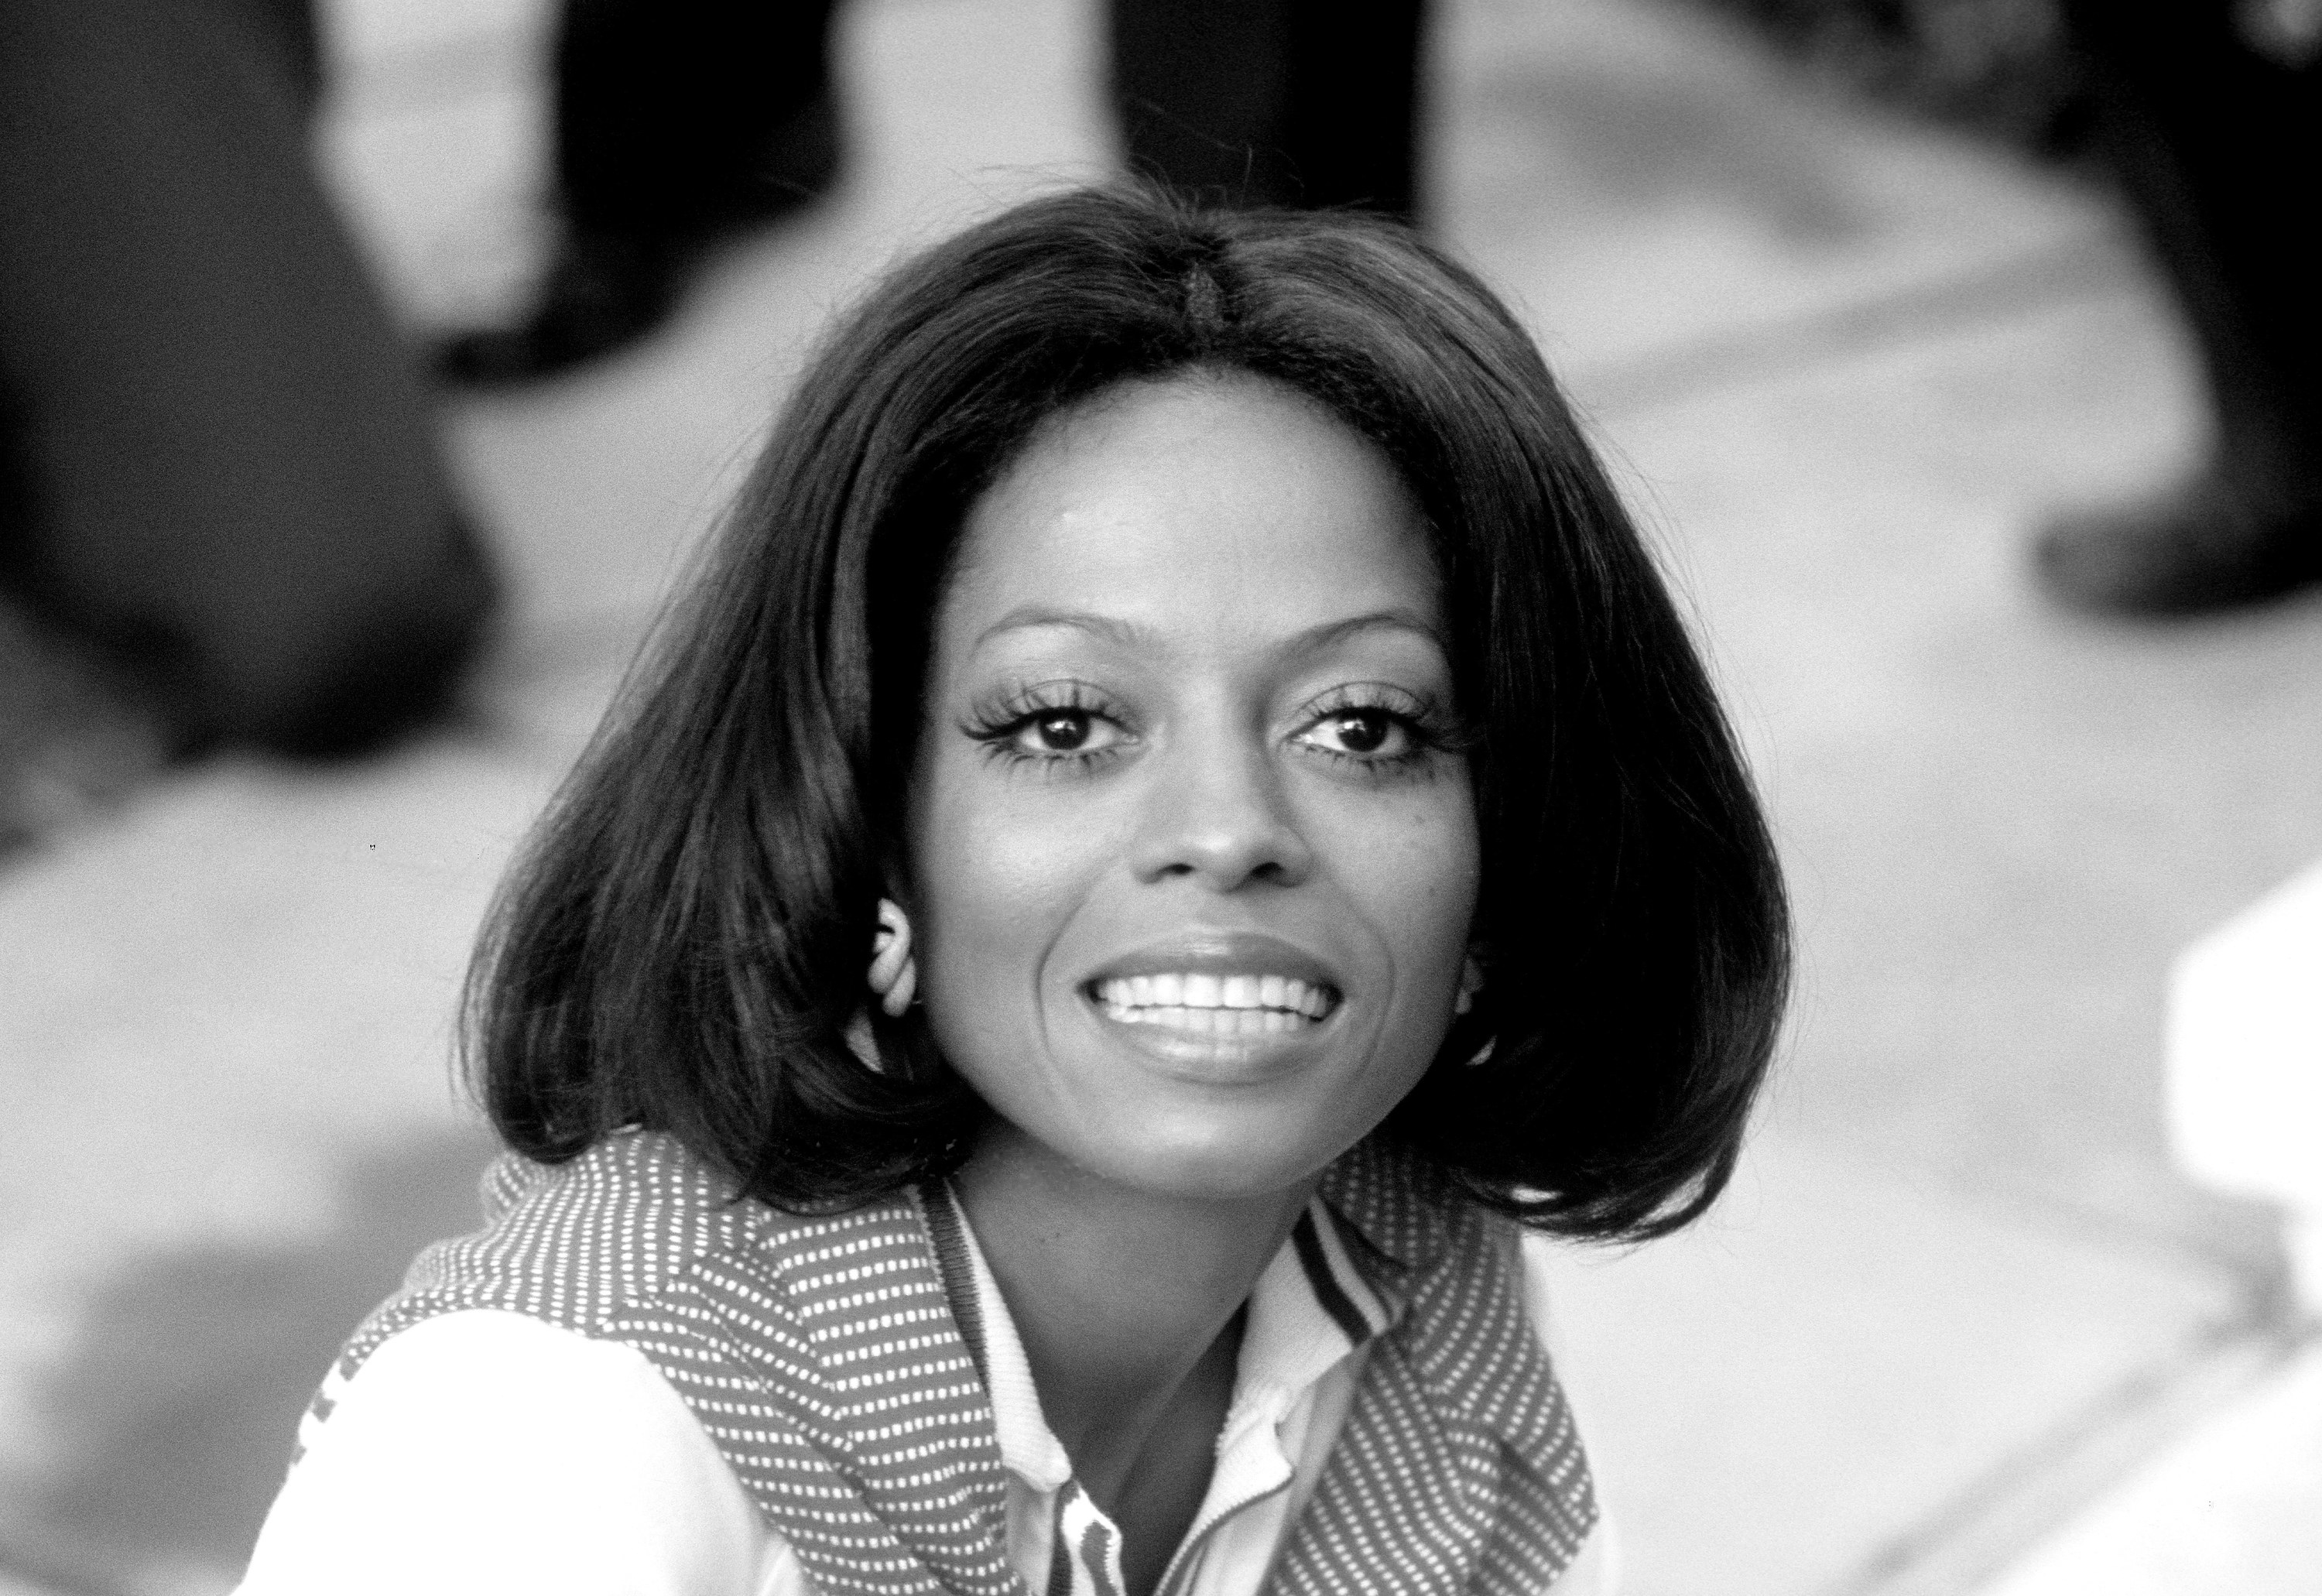 Diana Ross is photographed in London, England, in 1973